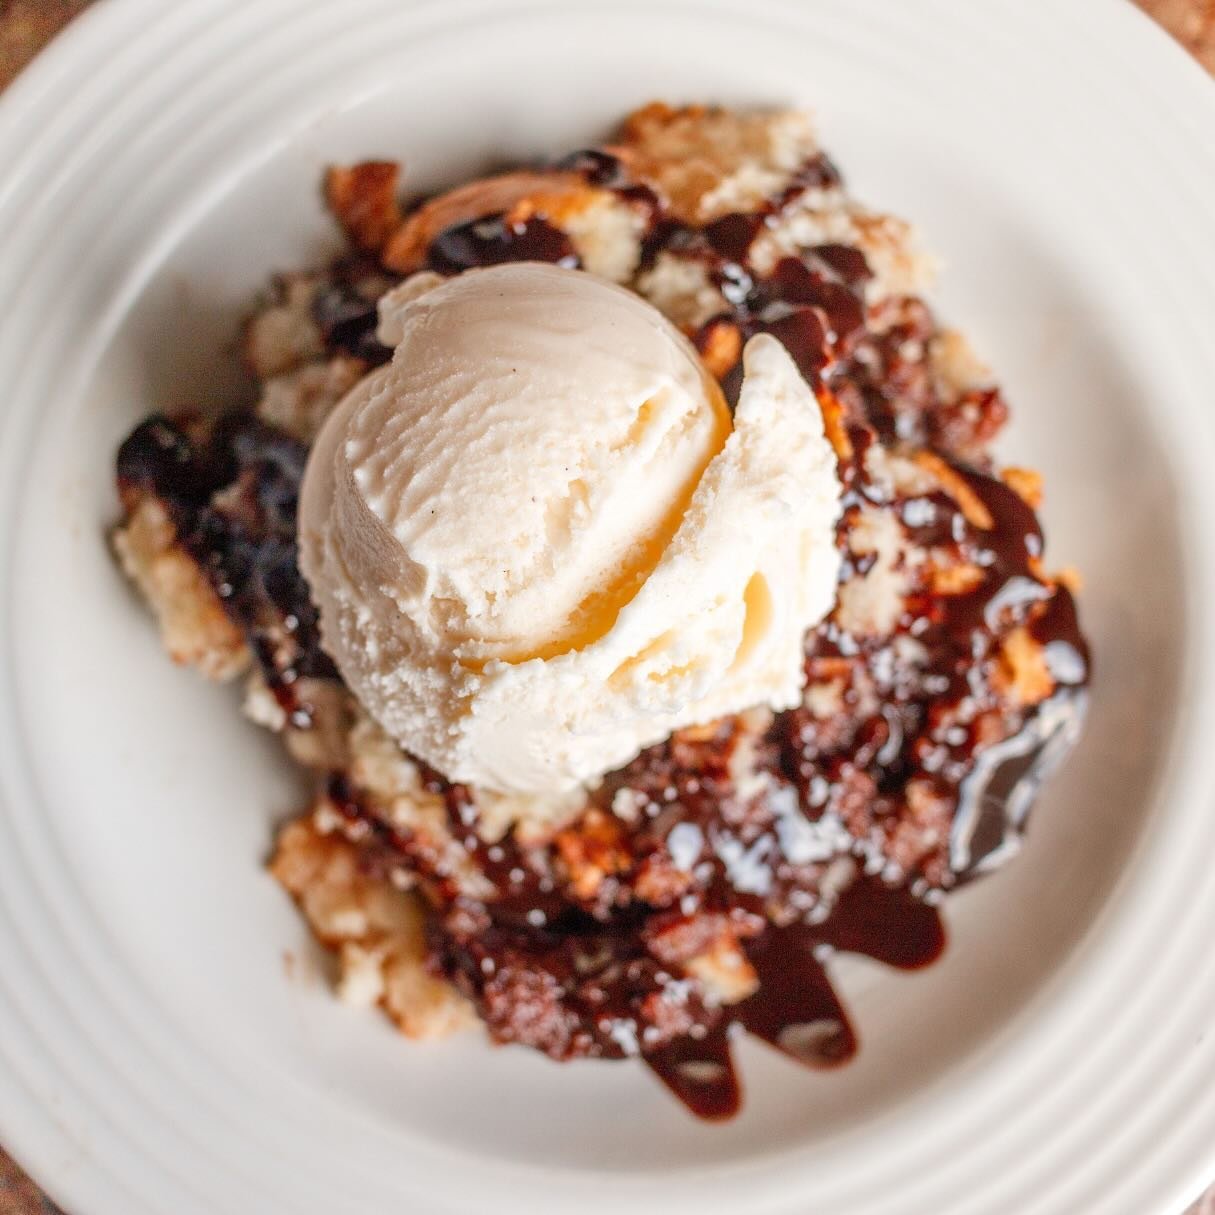 🍫✨ Indulge in a little chocolatey goodness this Mother&rsquo;s Day with Puckett&rsquo;s famous Jan&rsquo;s Chocolate Cobbler! 🍫✨ We&rsquo;re thrilled to be featured in &lsquo;Southern Chefs&rsquo; Best Mother&rsquo;s Day Recipes&rsquo; from @theloc